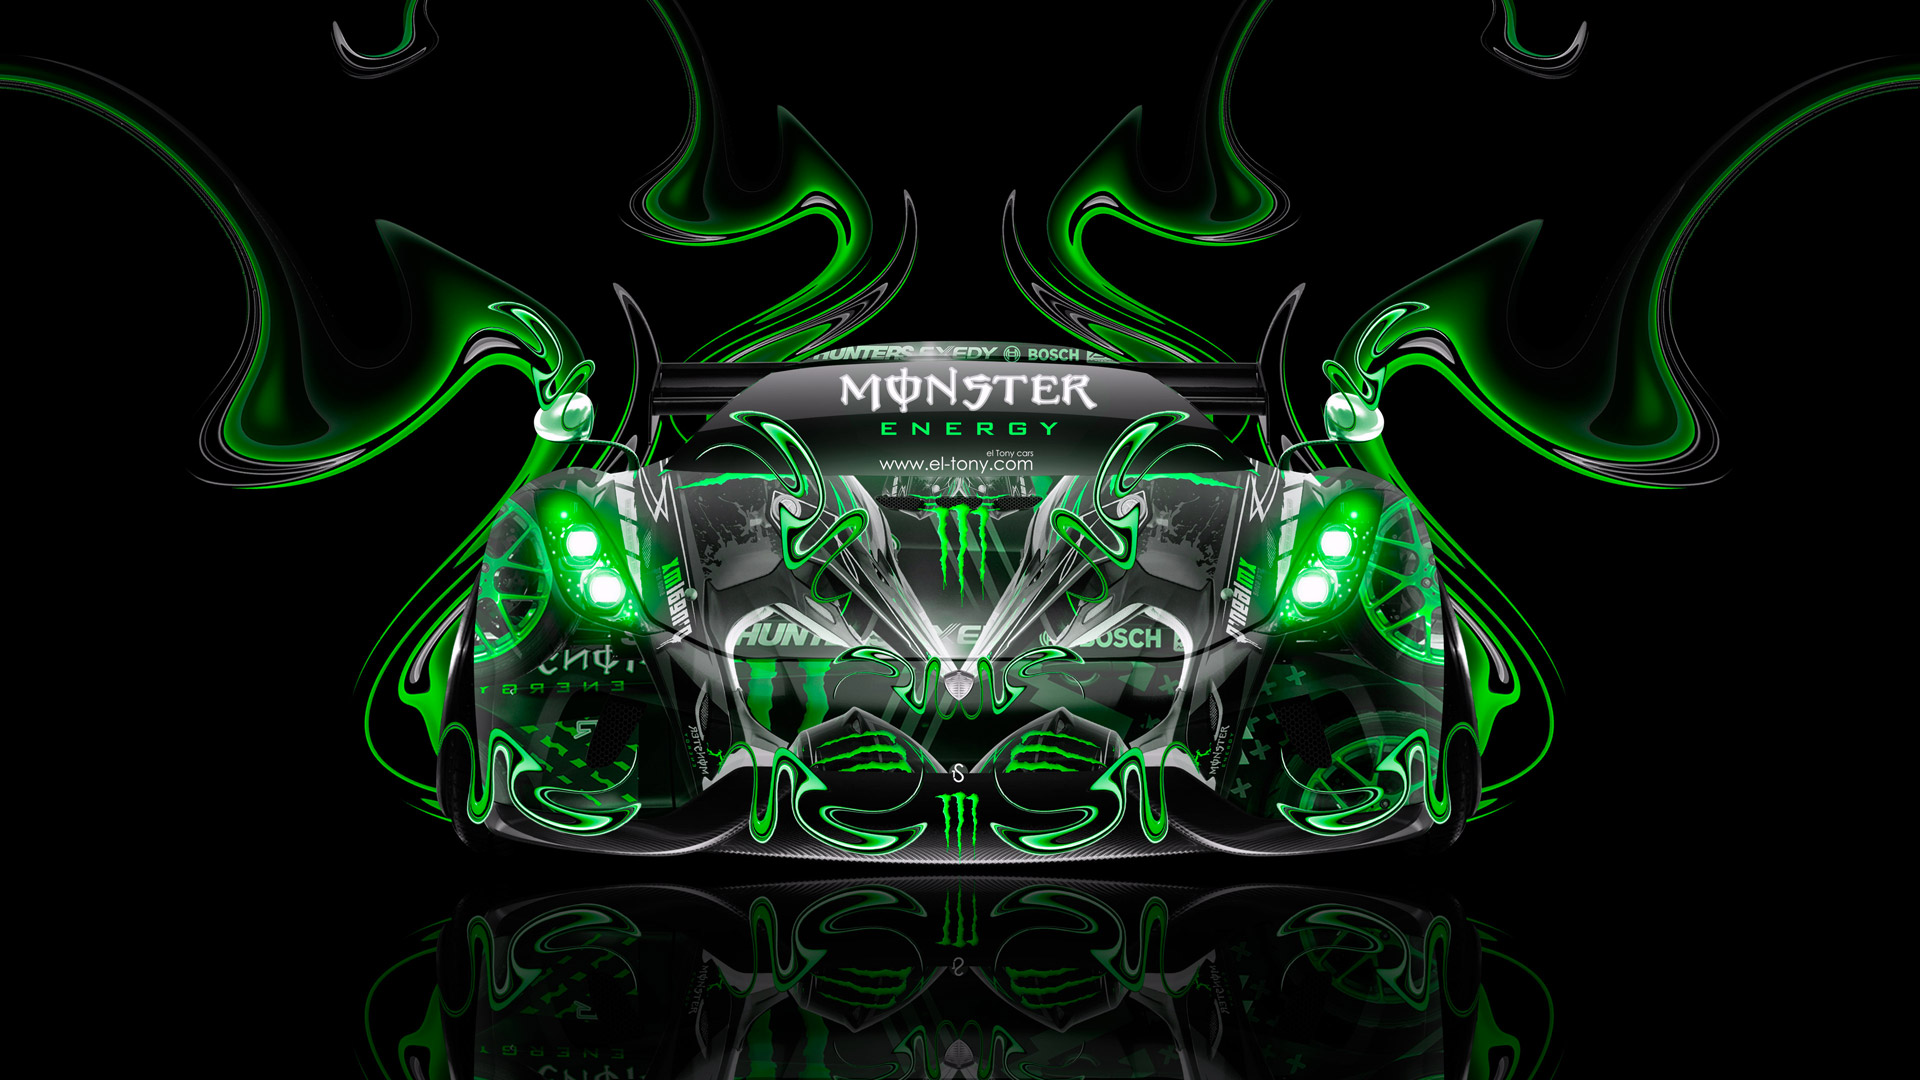 Monster Energy Koenigsegg Regera Front Super Plastic Car 2015 Green Colors HD Wallpaper Design By Tony Kokhan Tony.com Image, Free Download, Borrow, and Streaming, Internet Archive